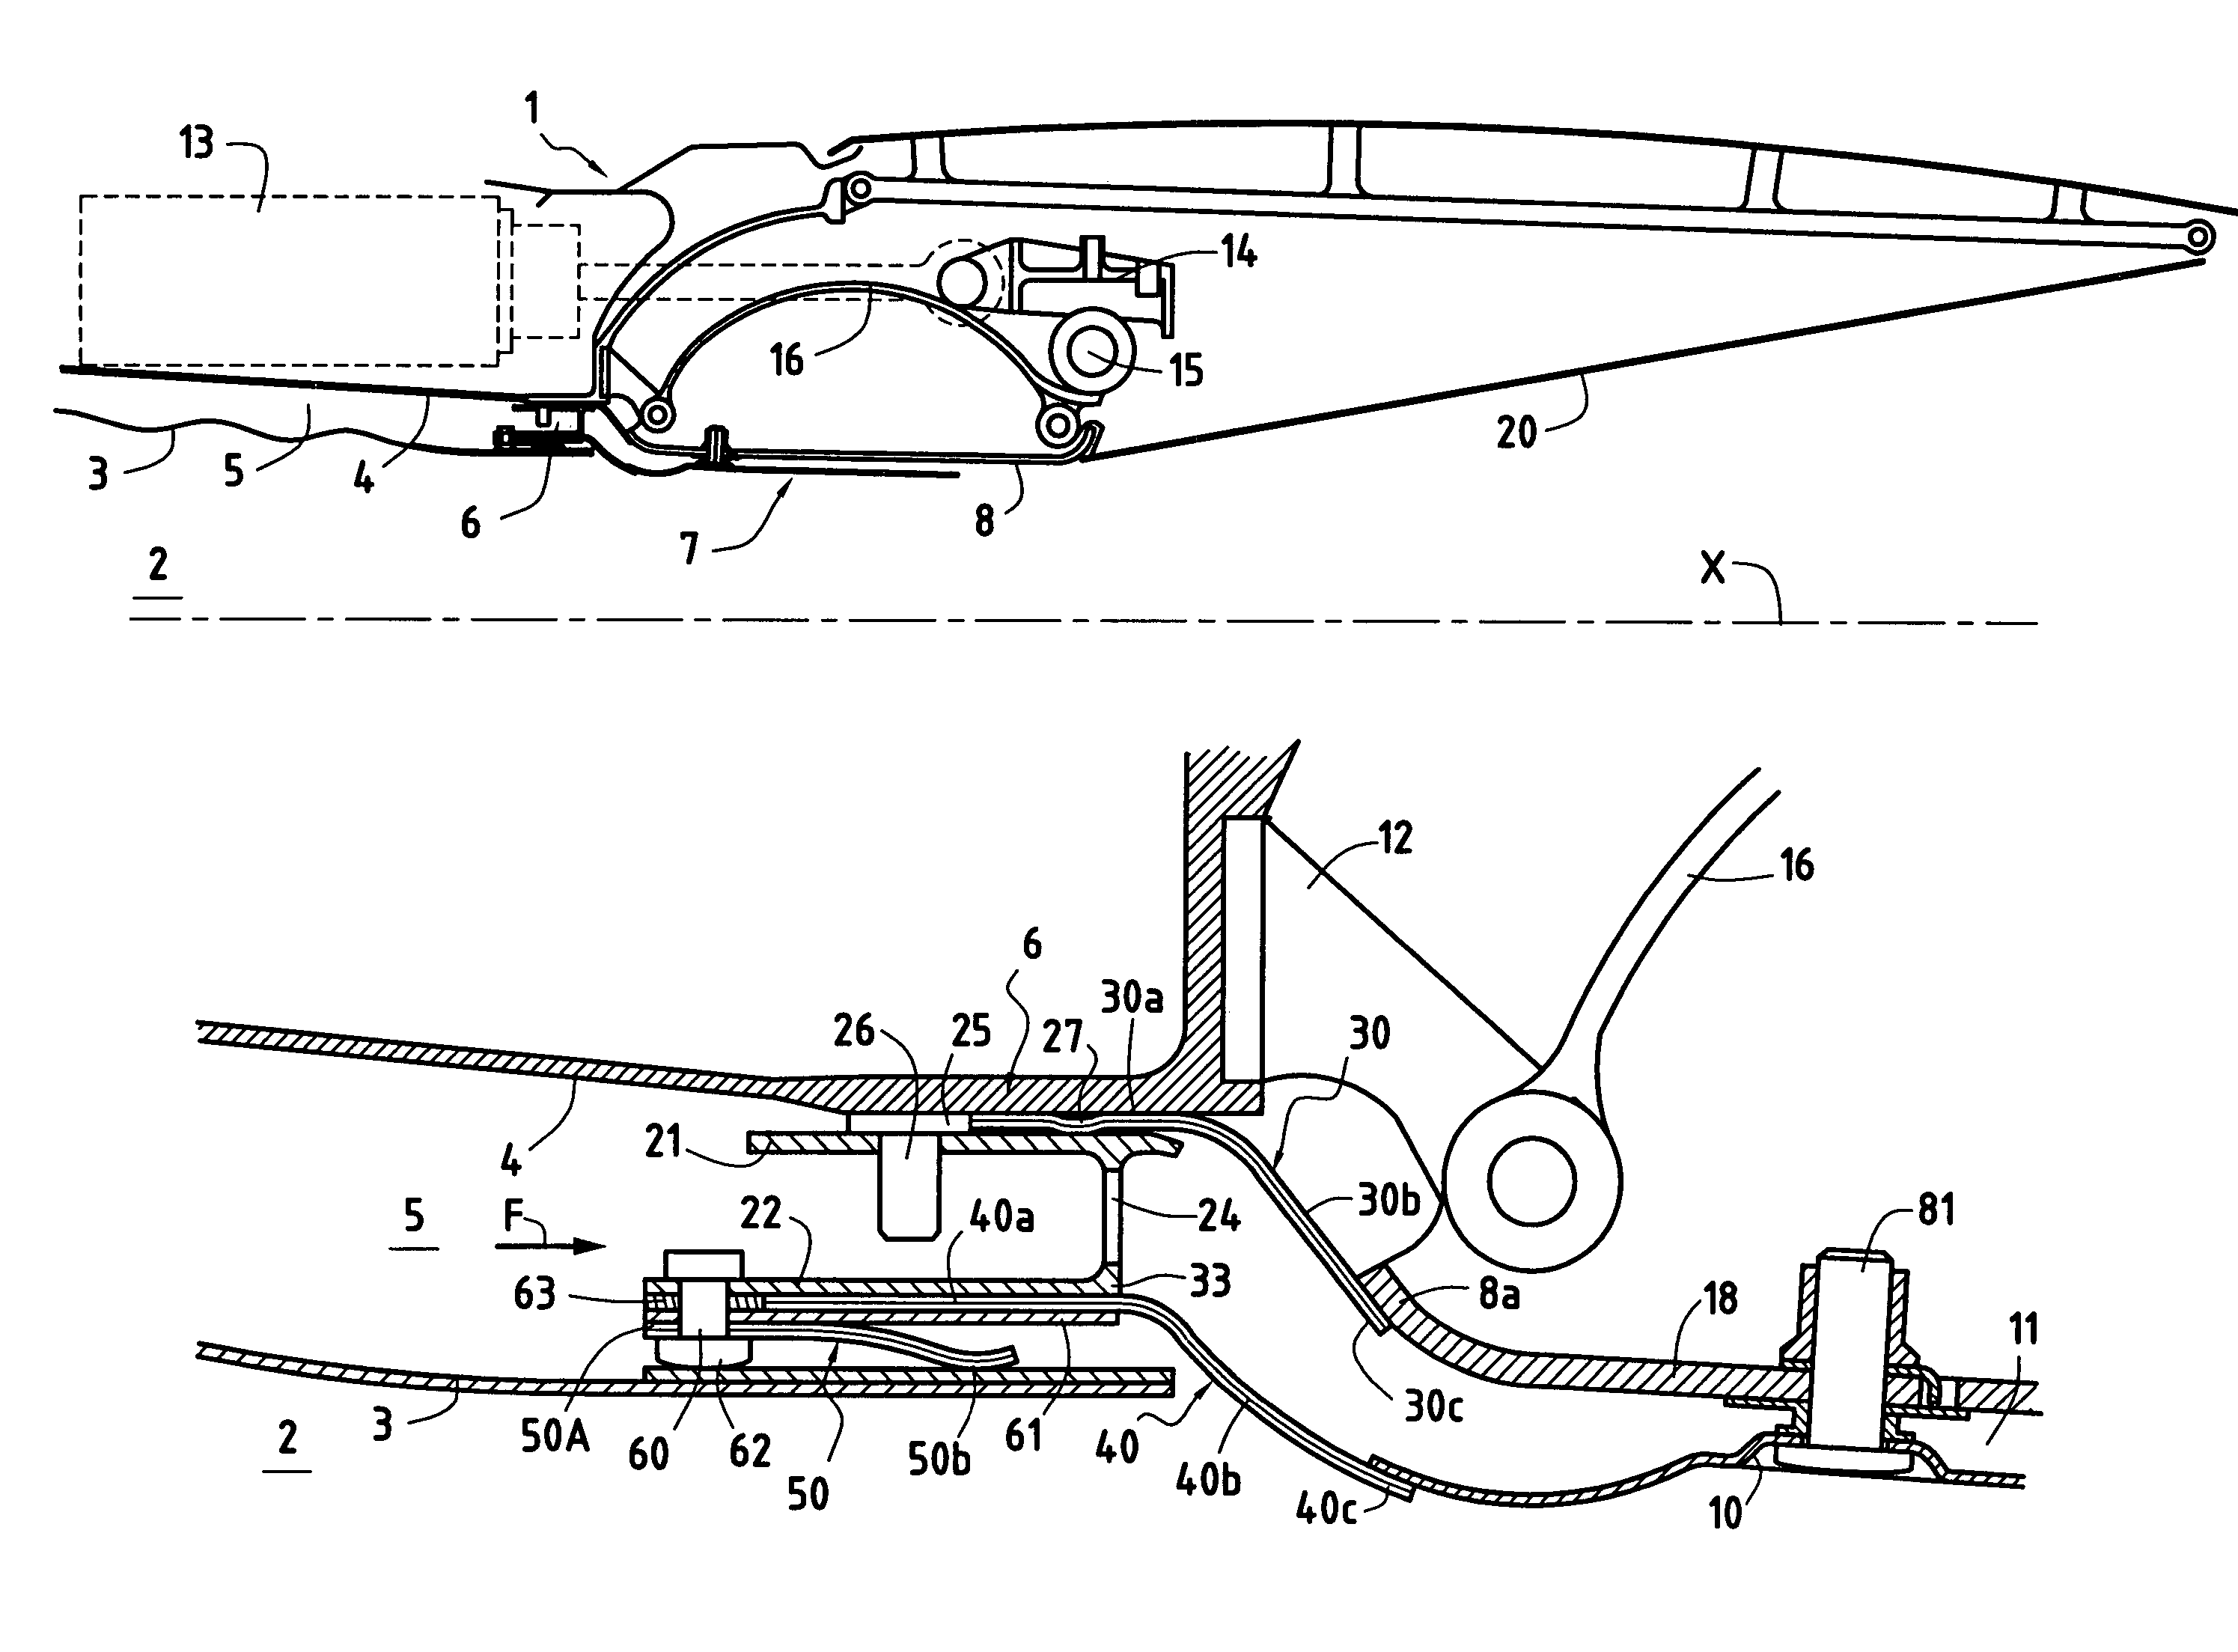 System for sealing the secondary flow at the inlet to a nozzle of a turbomachine having a post-combustion chamber